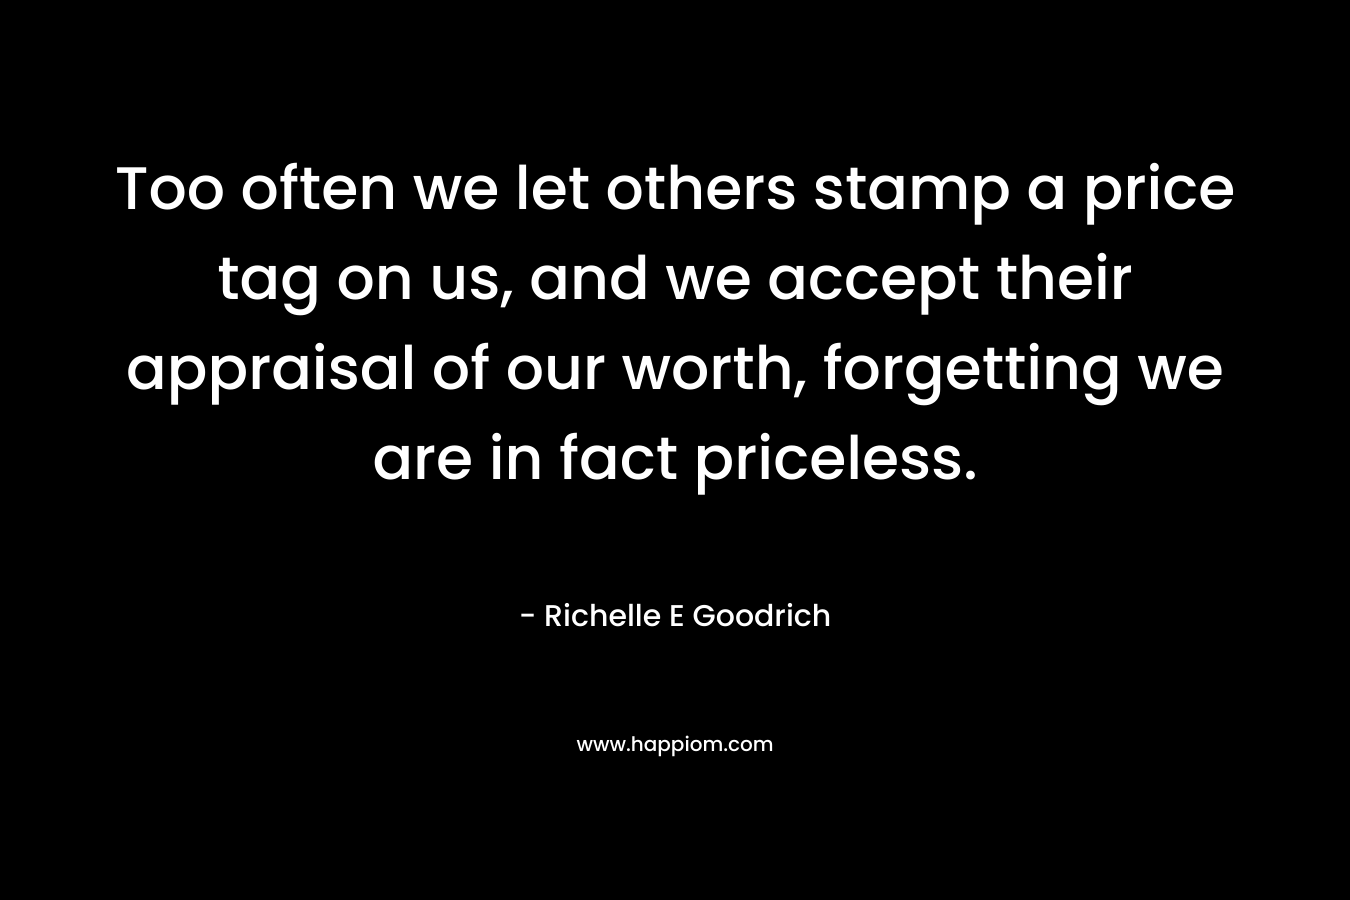 Too often we let others stamp a price tag on us, and we accept their appraisal of our worth, forgetting we are in fact priceless. – Richelle E Goodrich